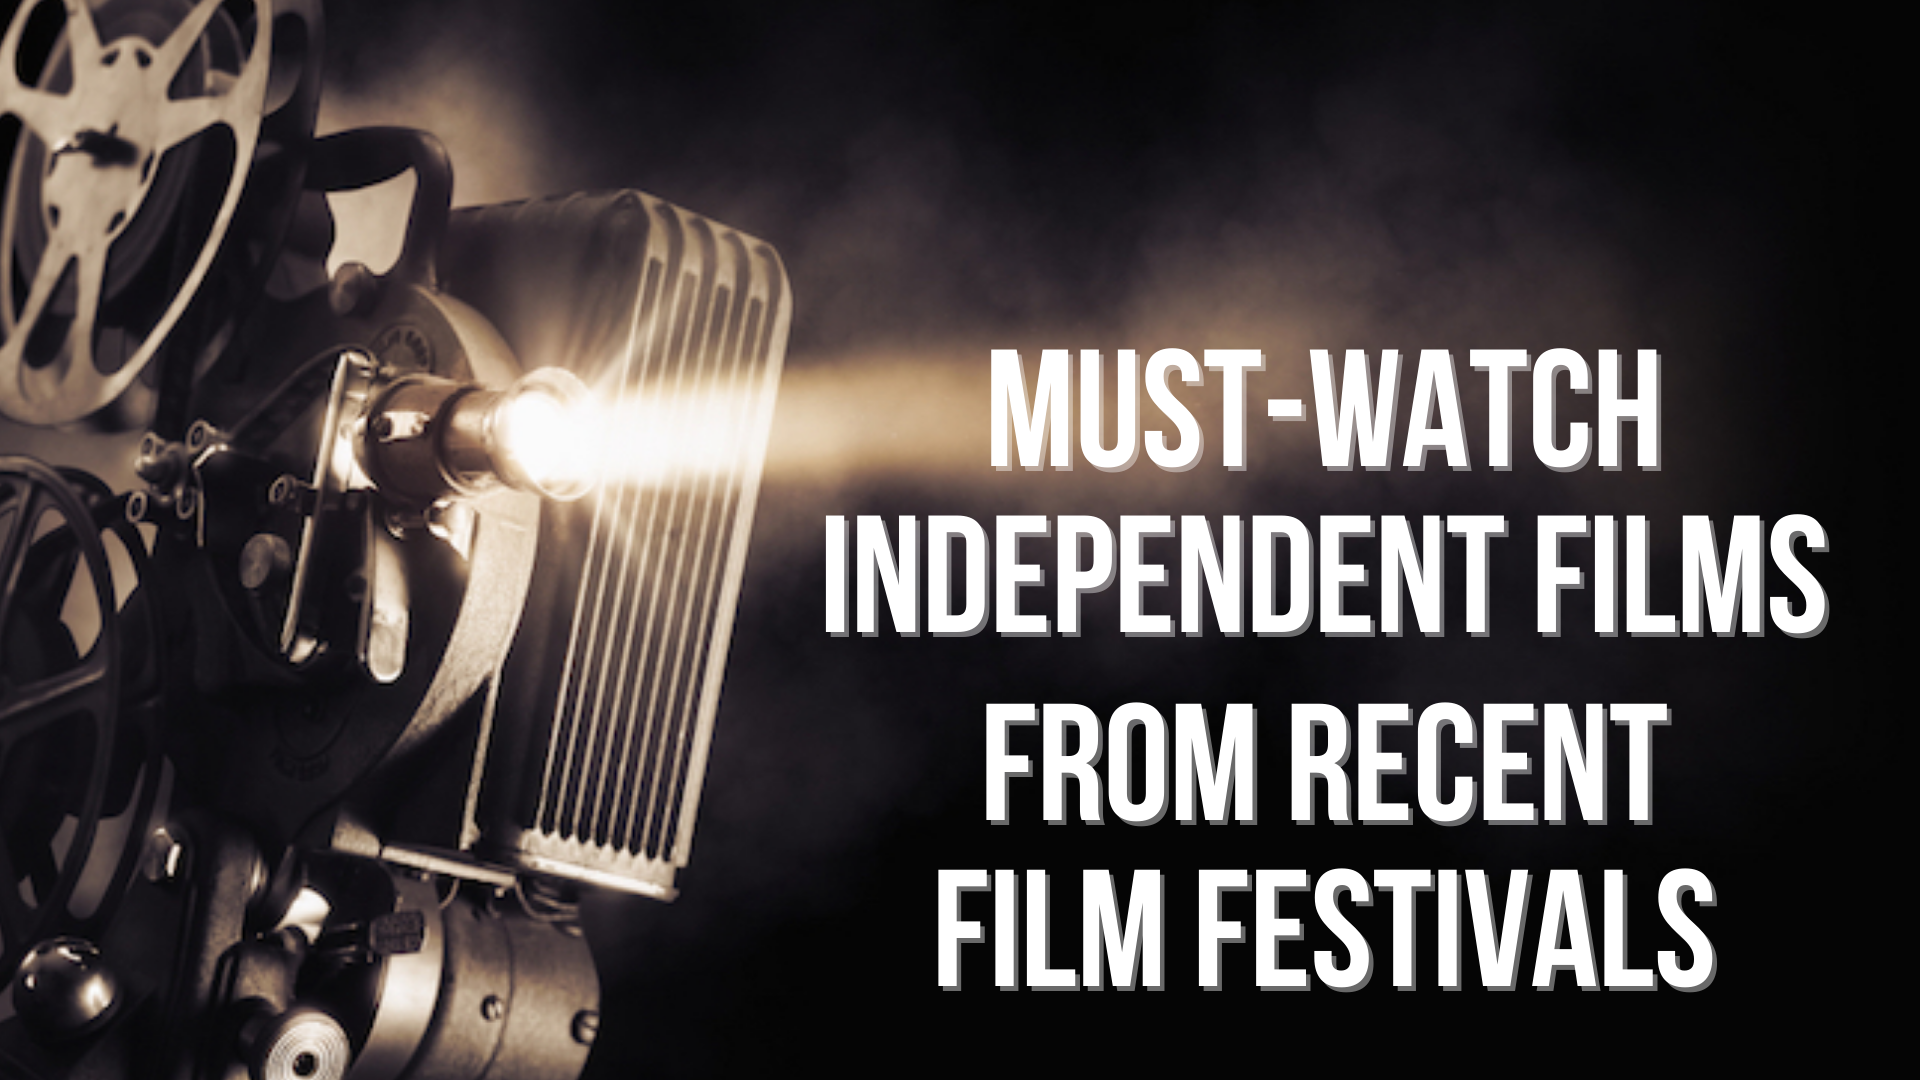 Unforgettable Independent Films That Stole the Spotlight at Recent Film Festivals